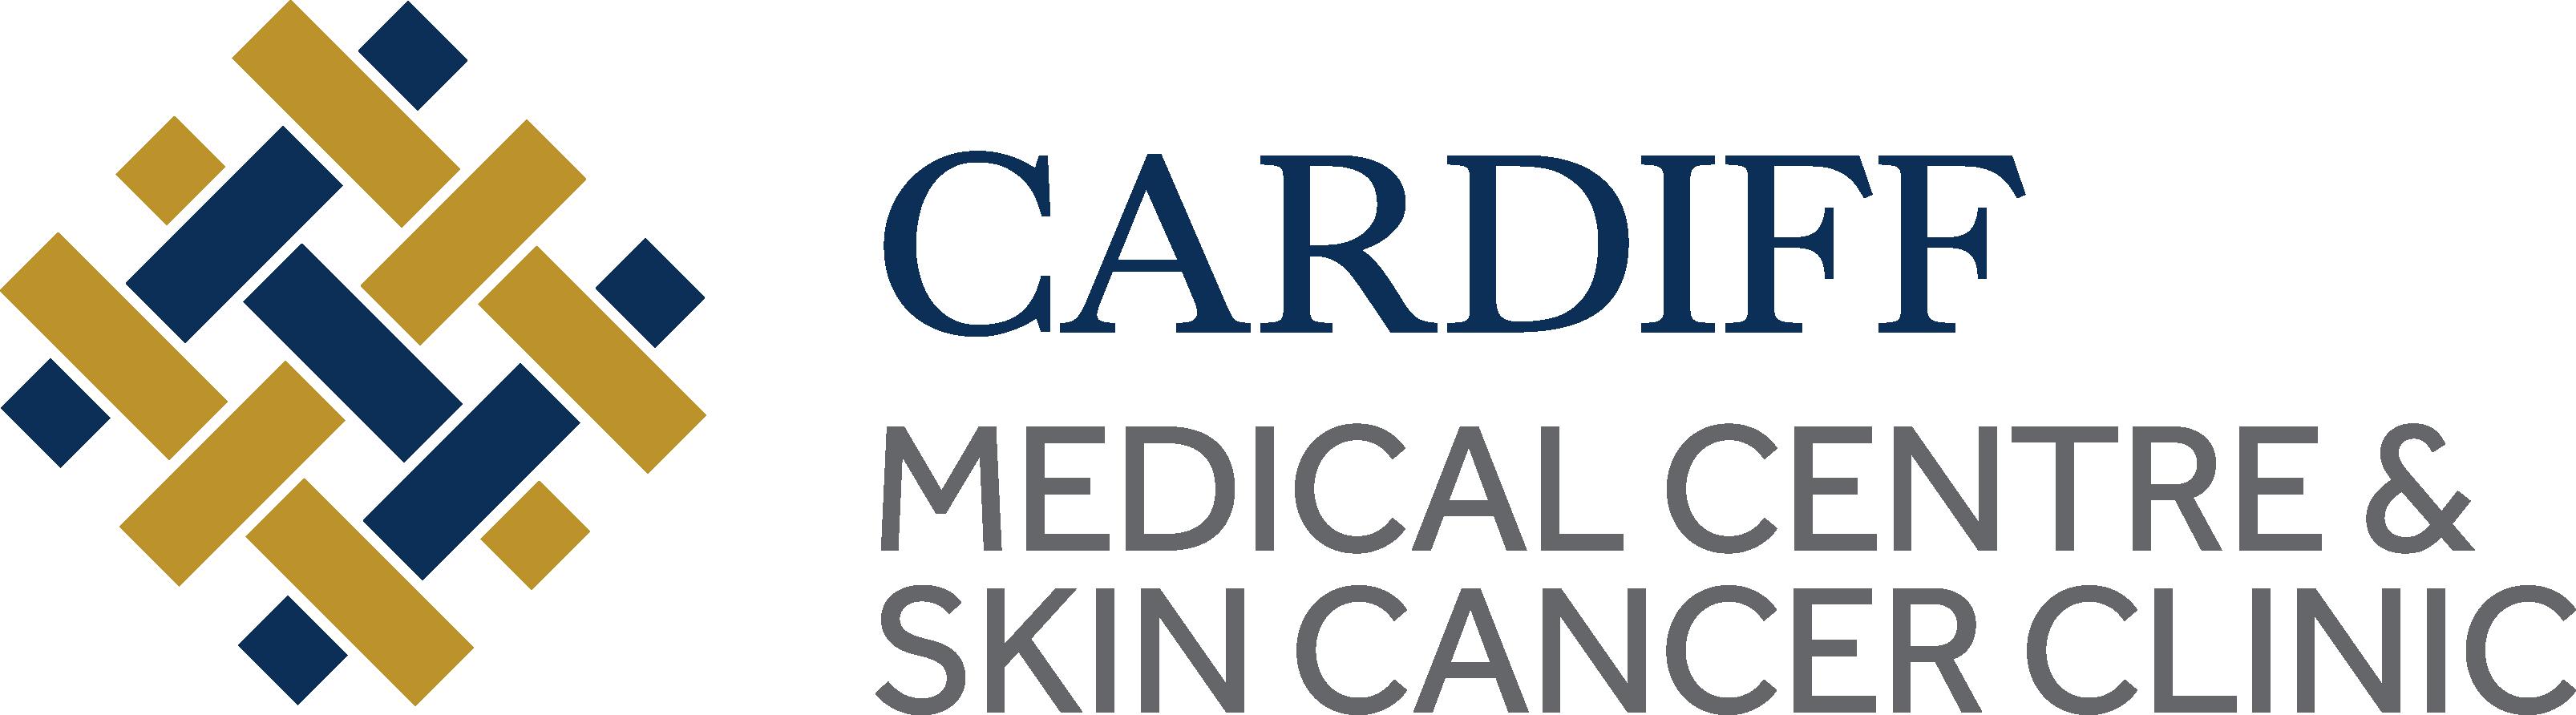 Cardiff Medical Centre and Skin Cancer Clinic